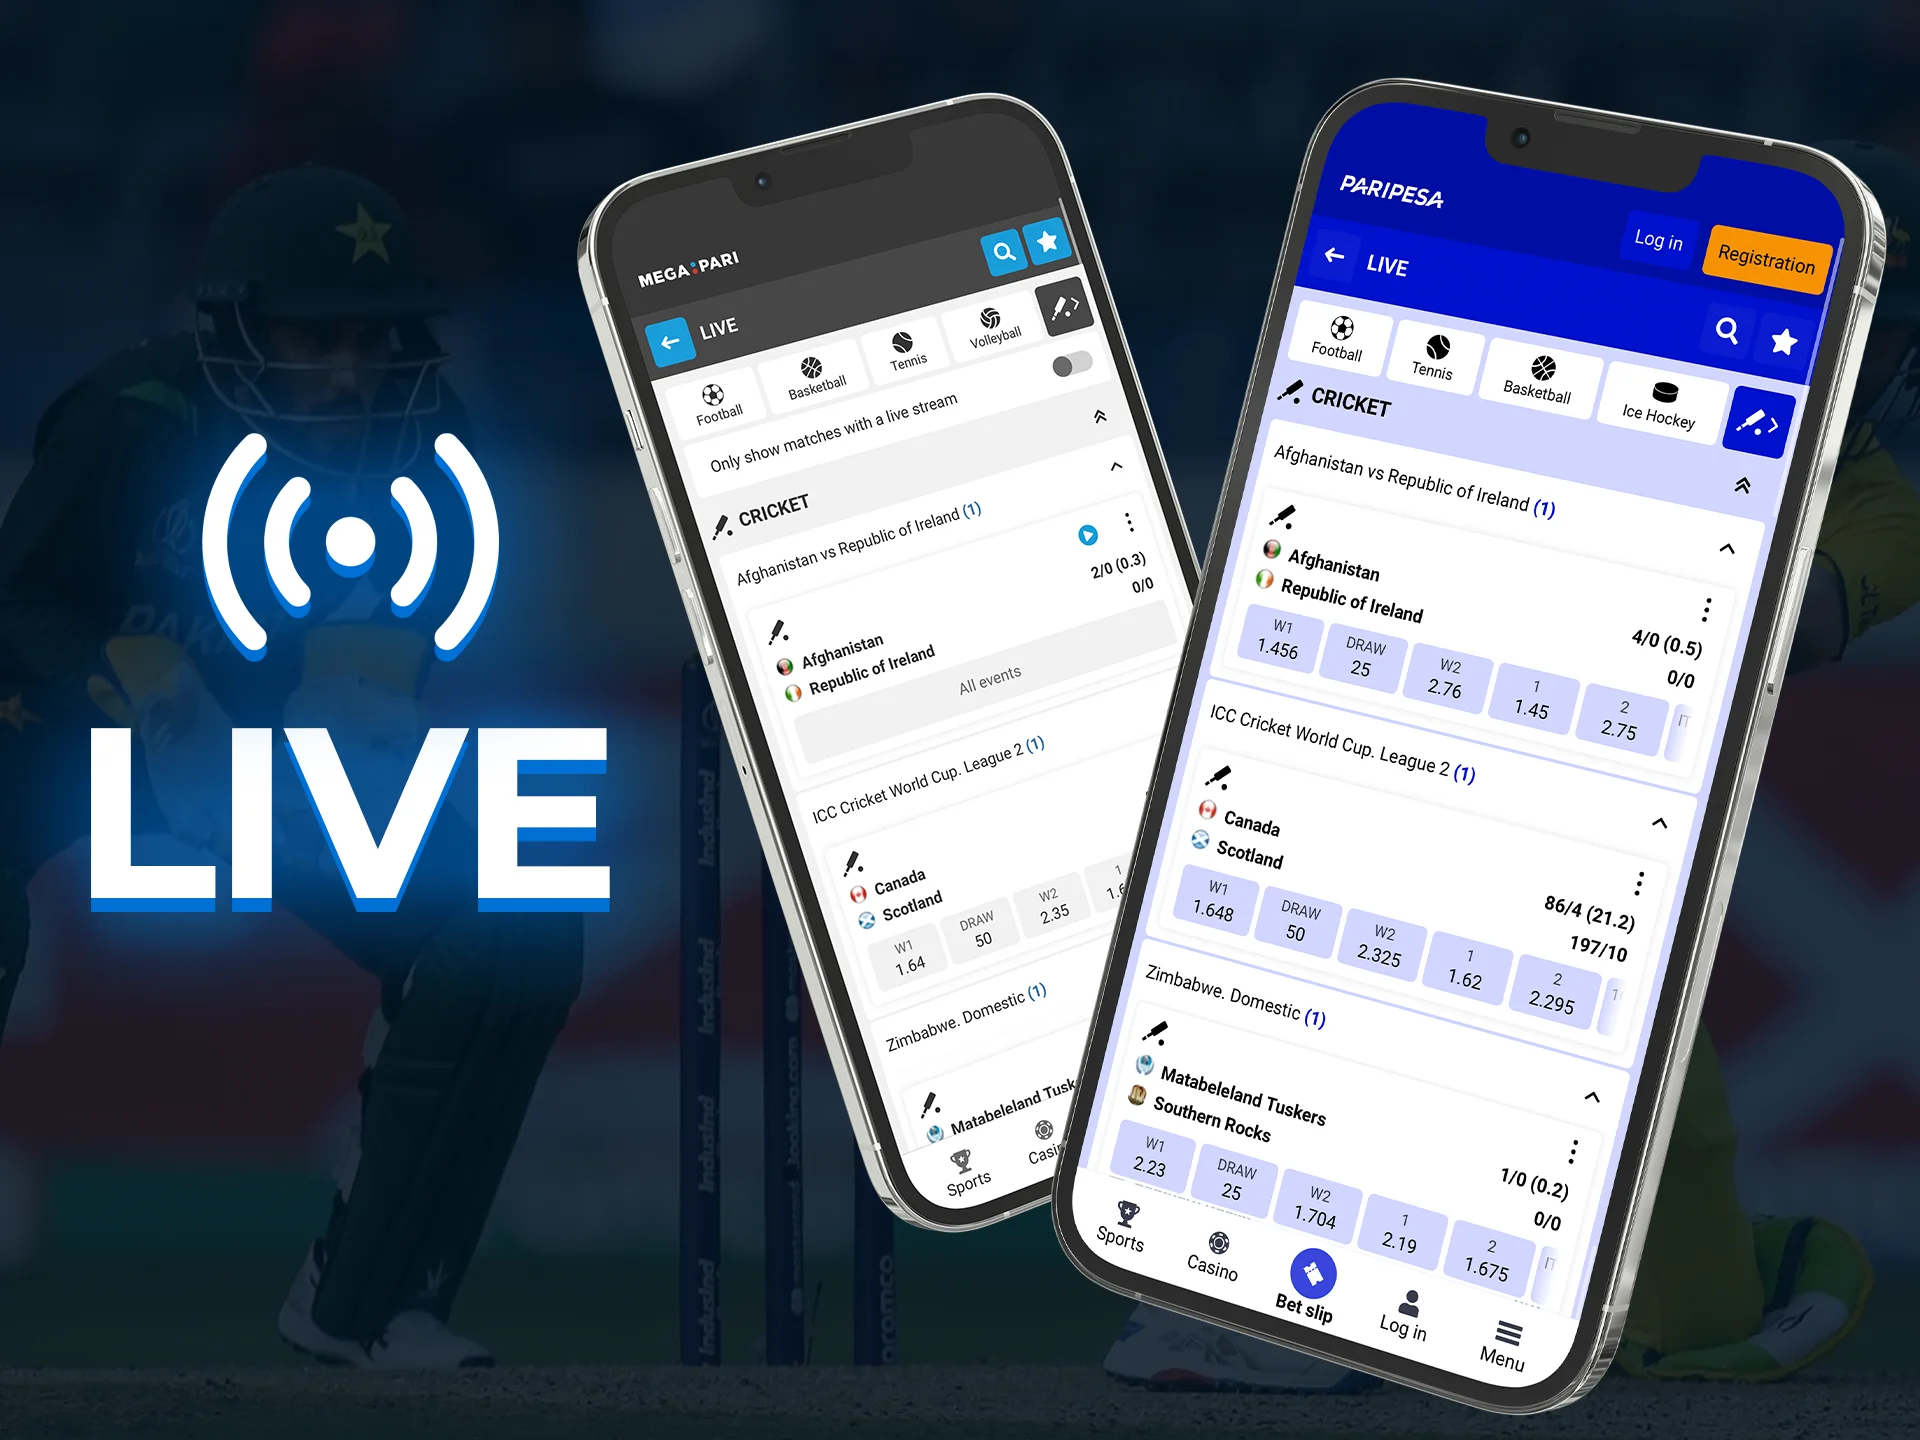 The Melbet app is the best for live cricket betting.